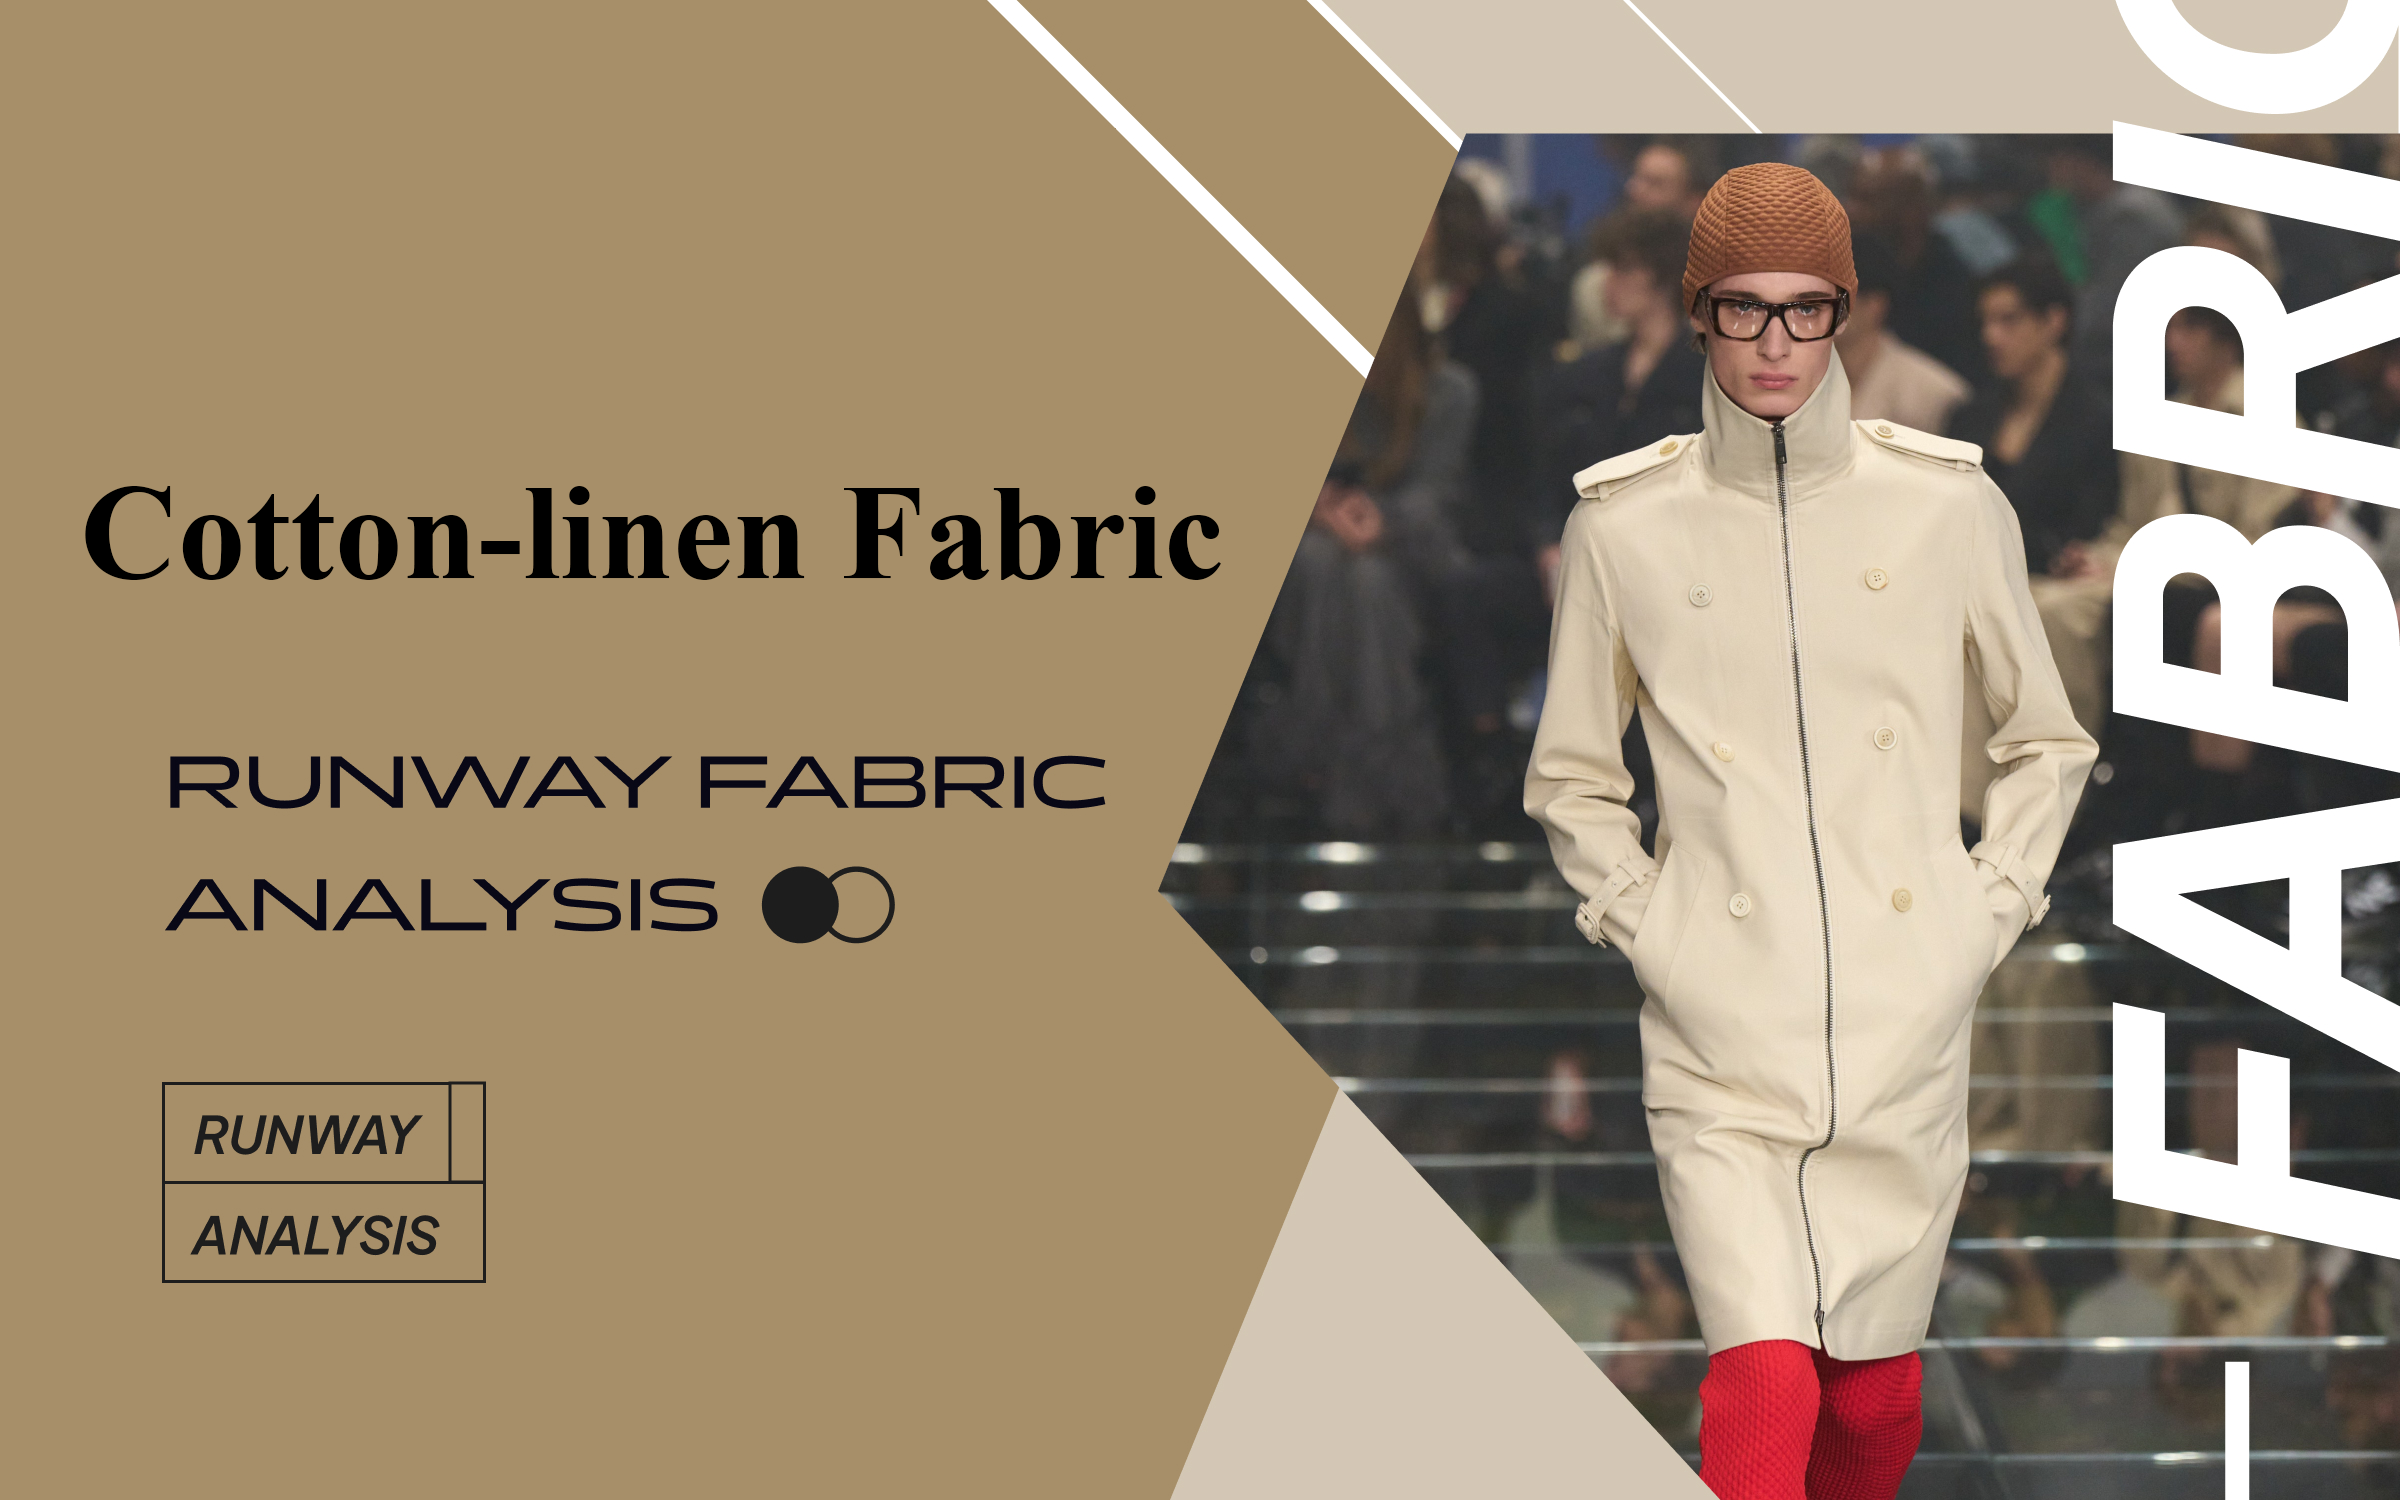 Cotton-linen Fabric -- The Comprehensive Analysis of Menswear Runway